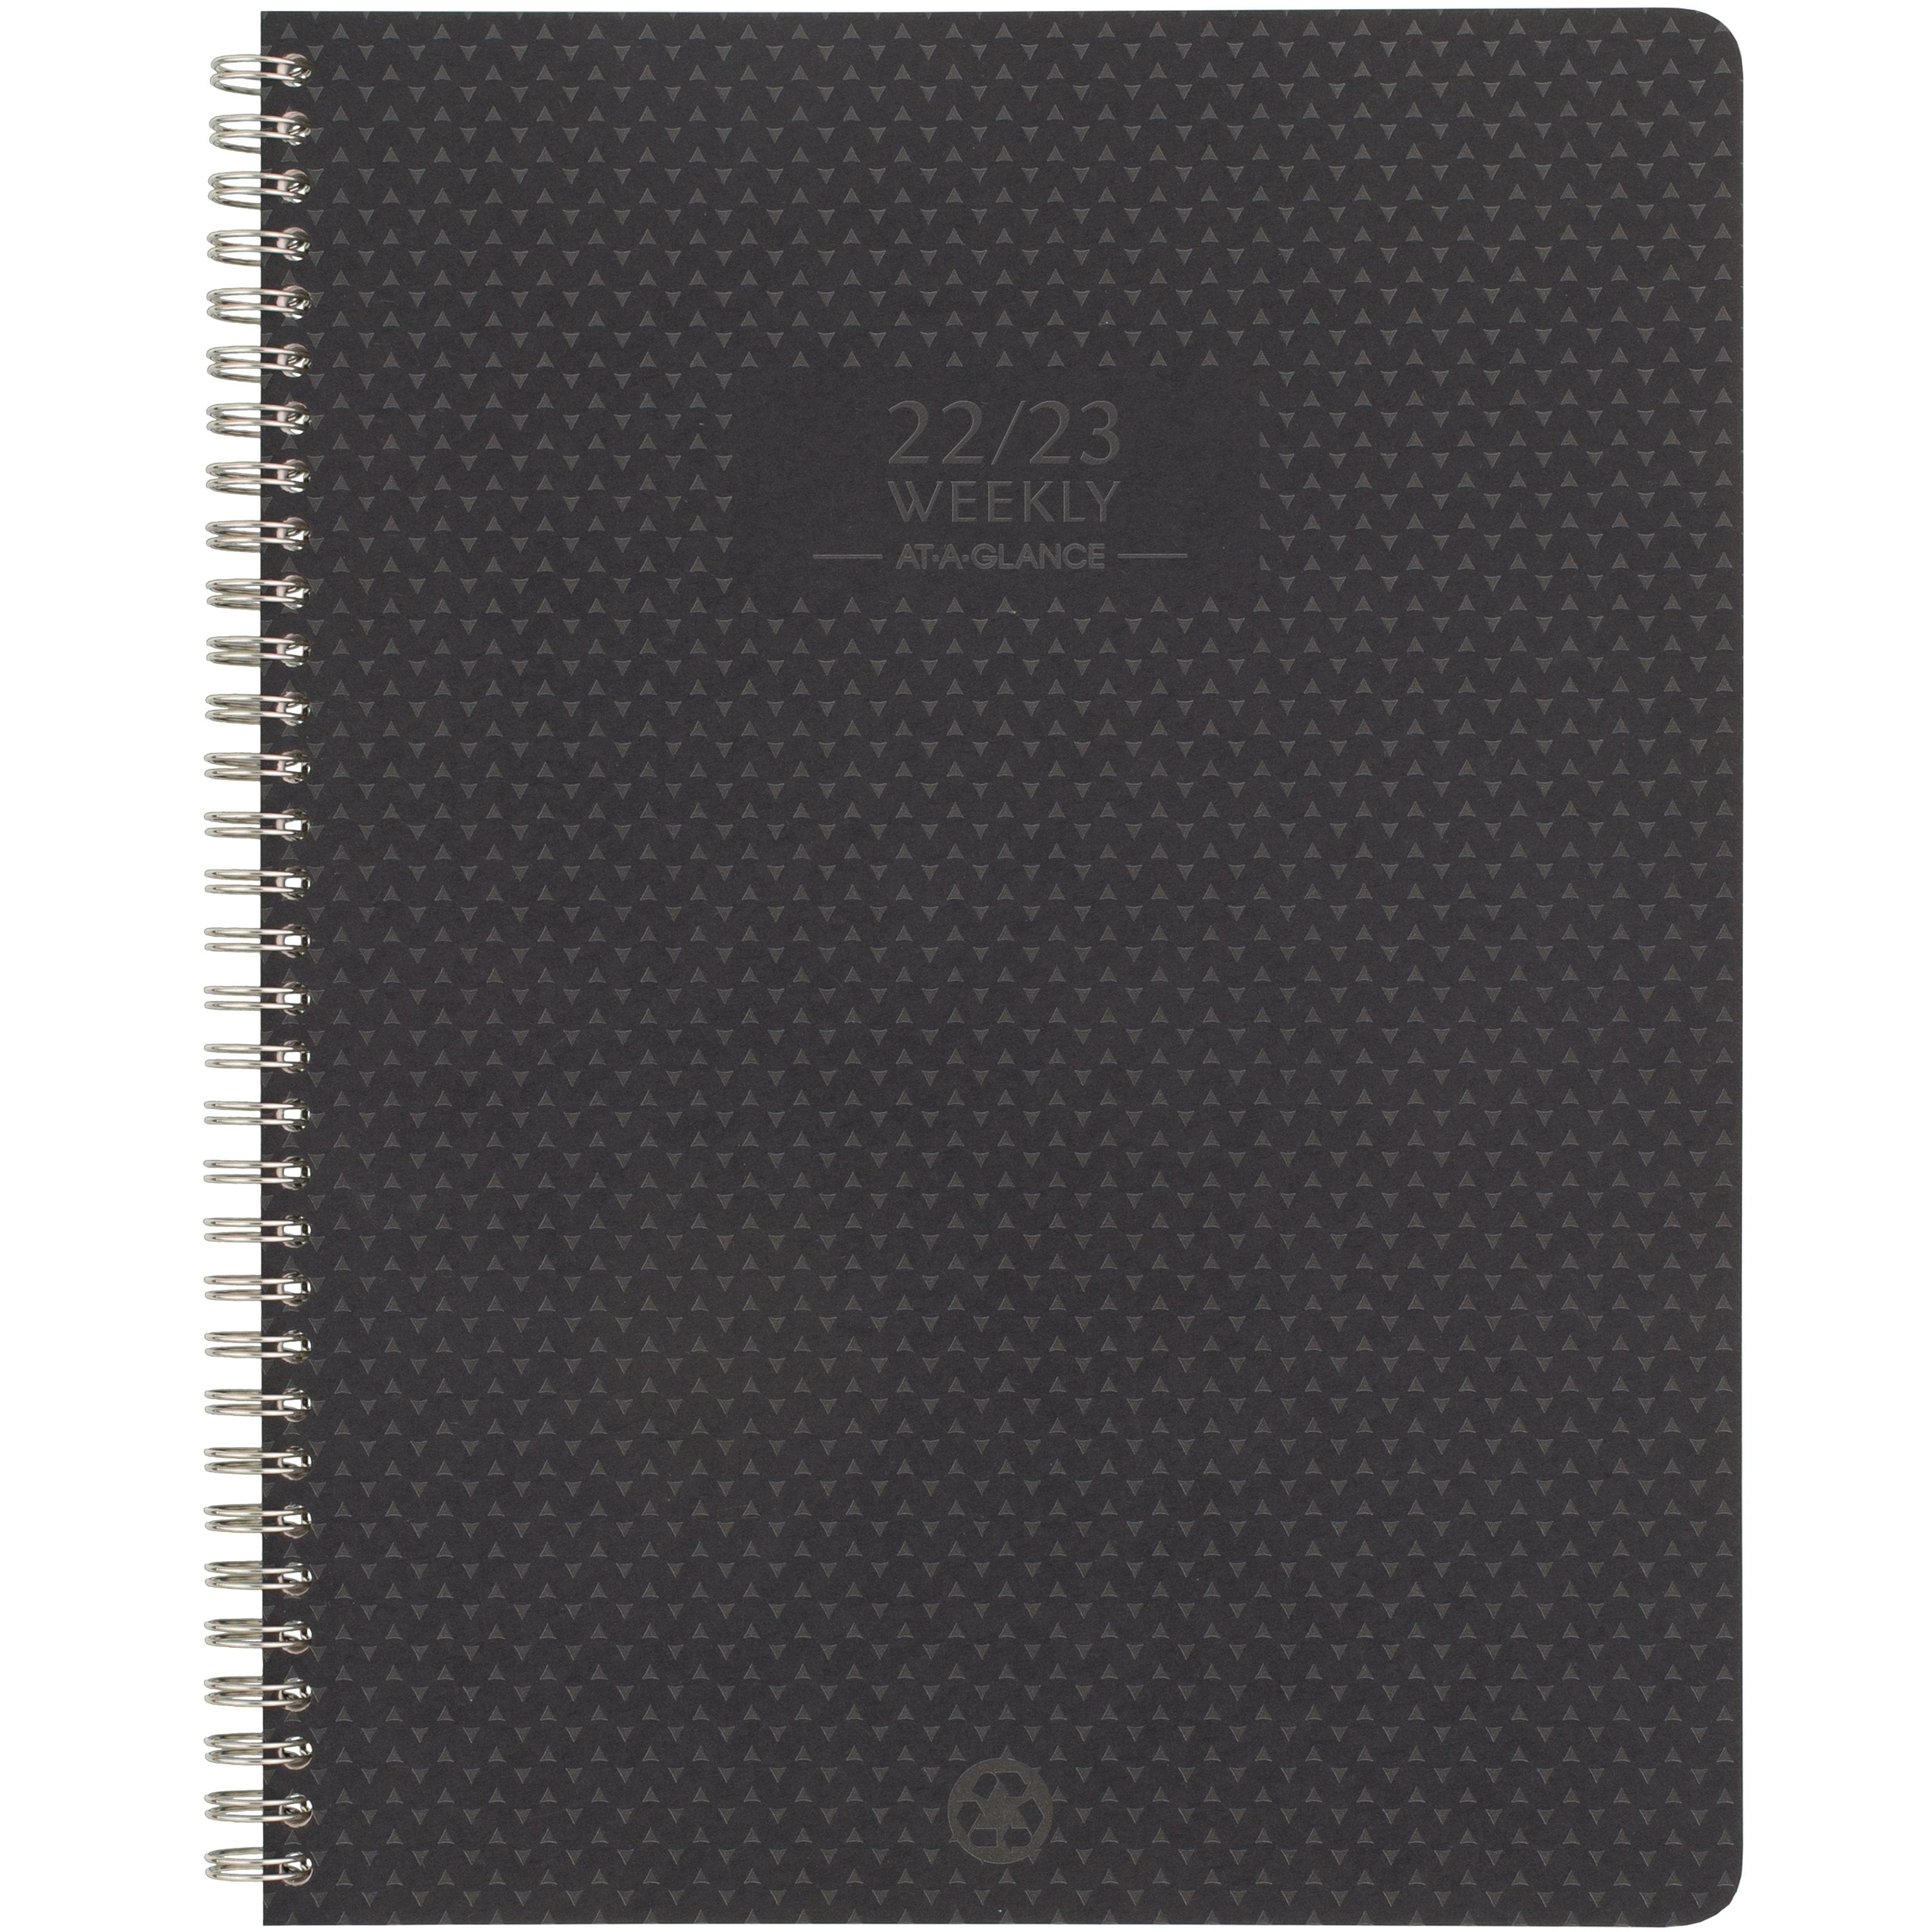 Weekly planner 2023-2024 - 13x18 cm - September 2023 to August